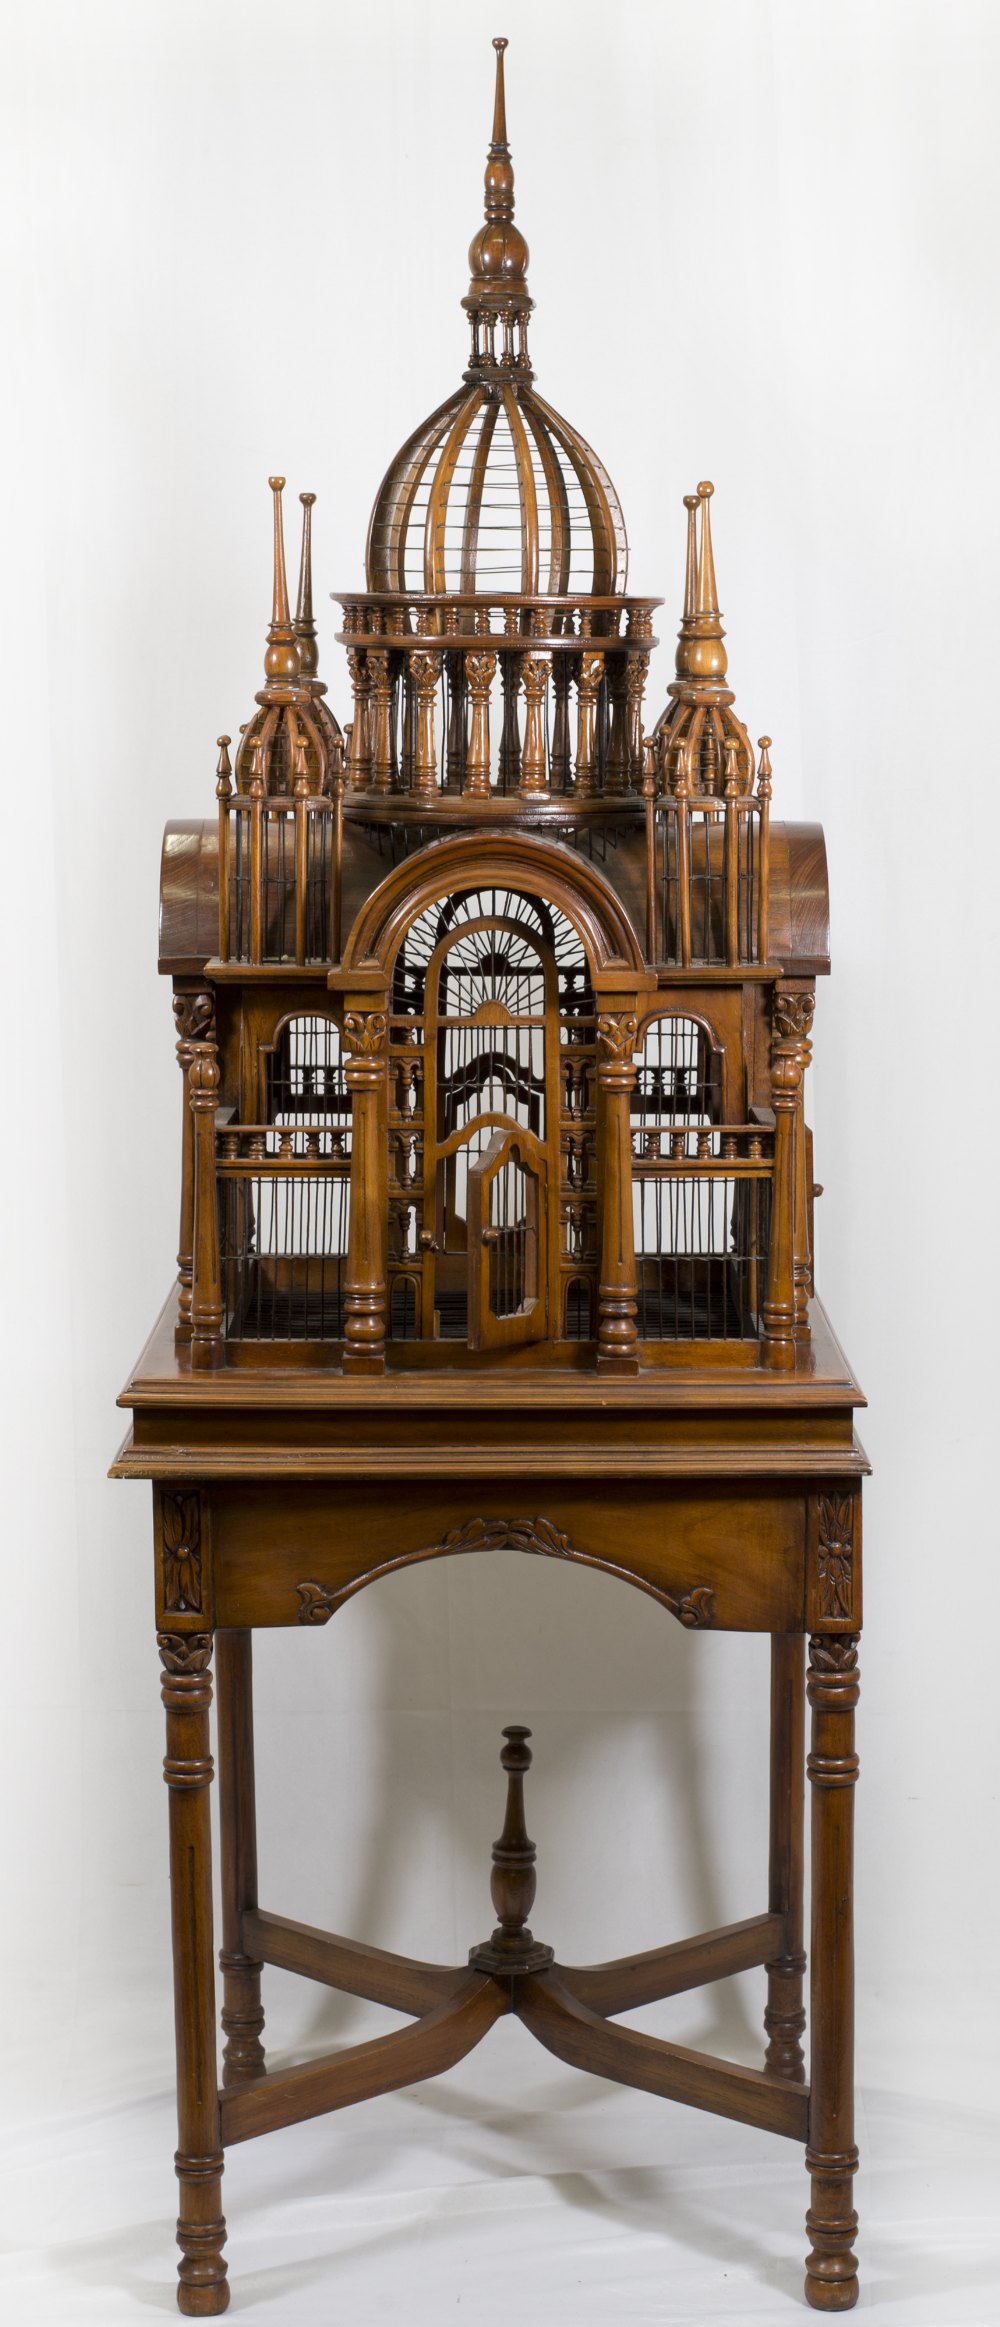 A reproduction Victorian design bird cage on stand in the form of a cathedral - 69in. high overall